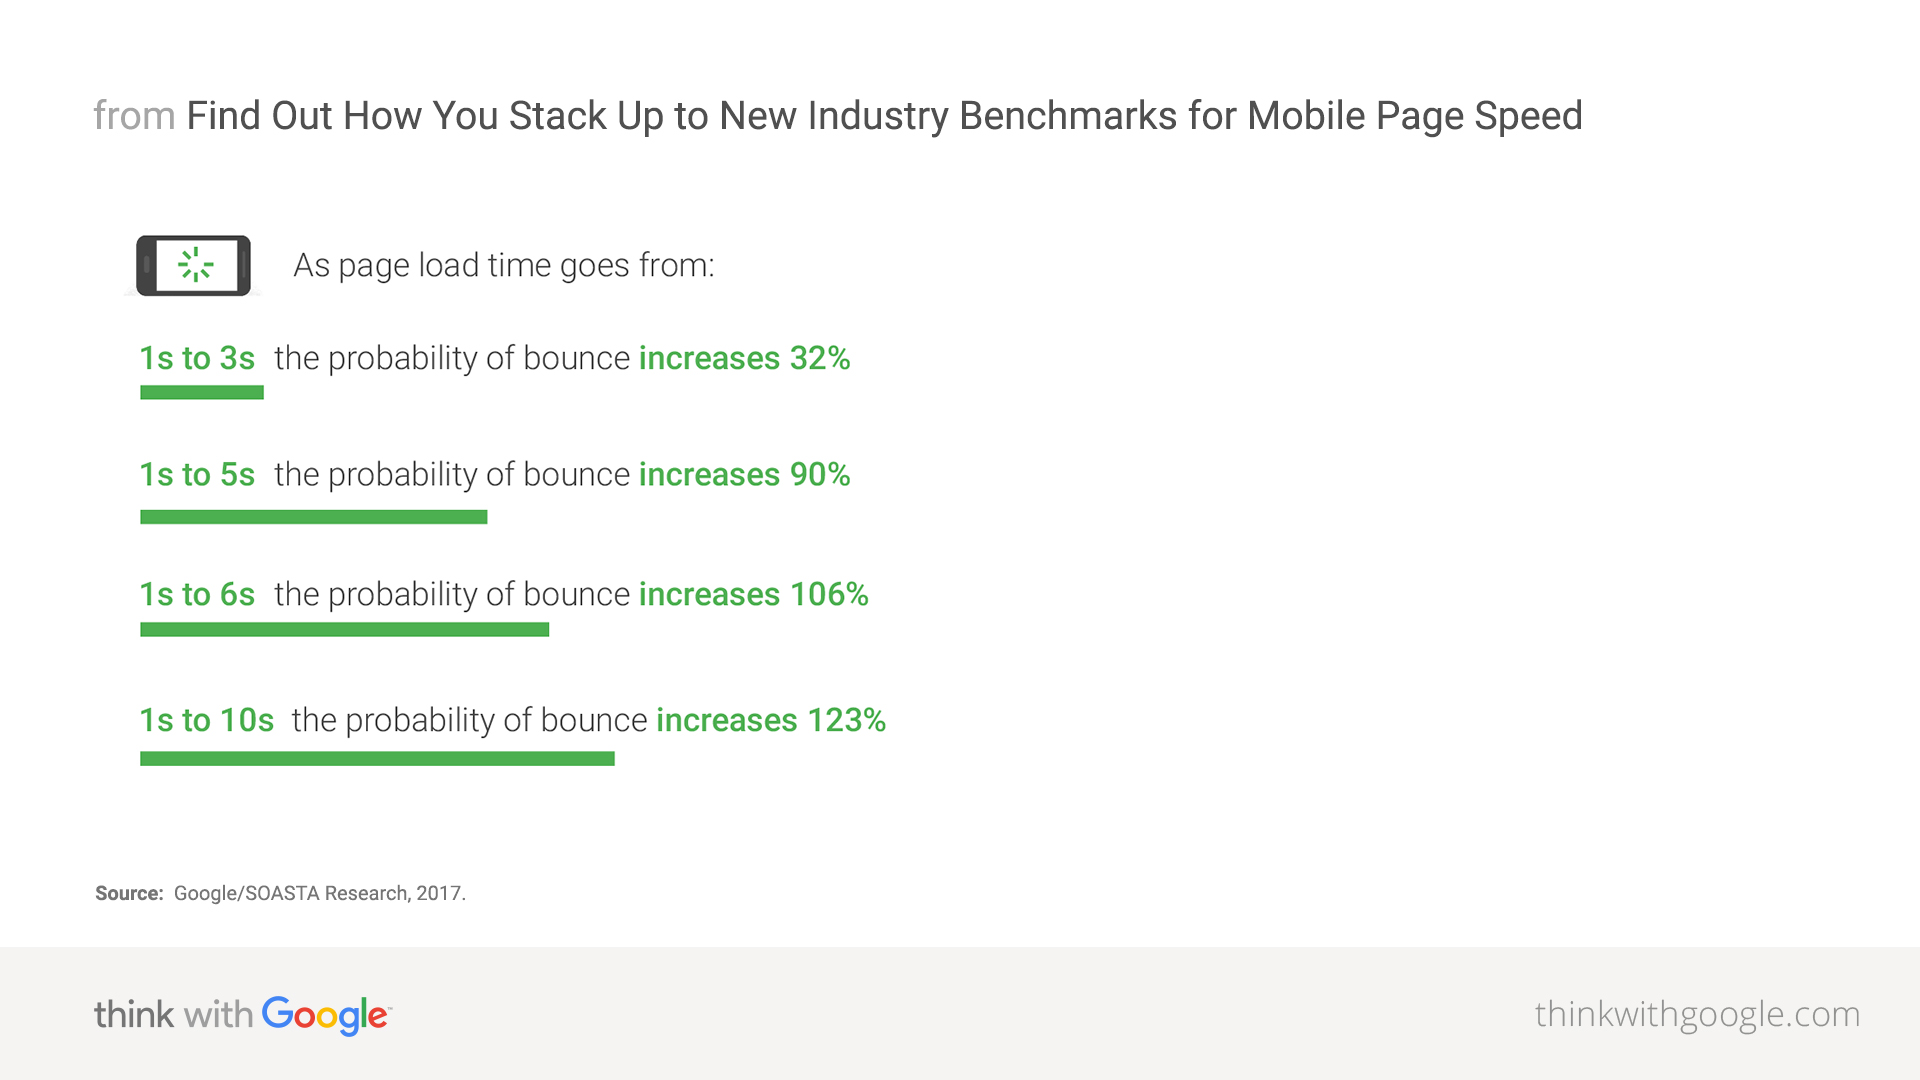 Google mobile page speed benchmarks 